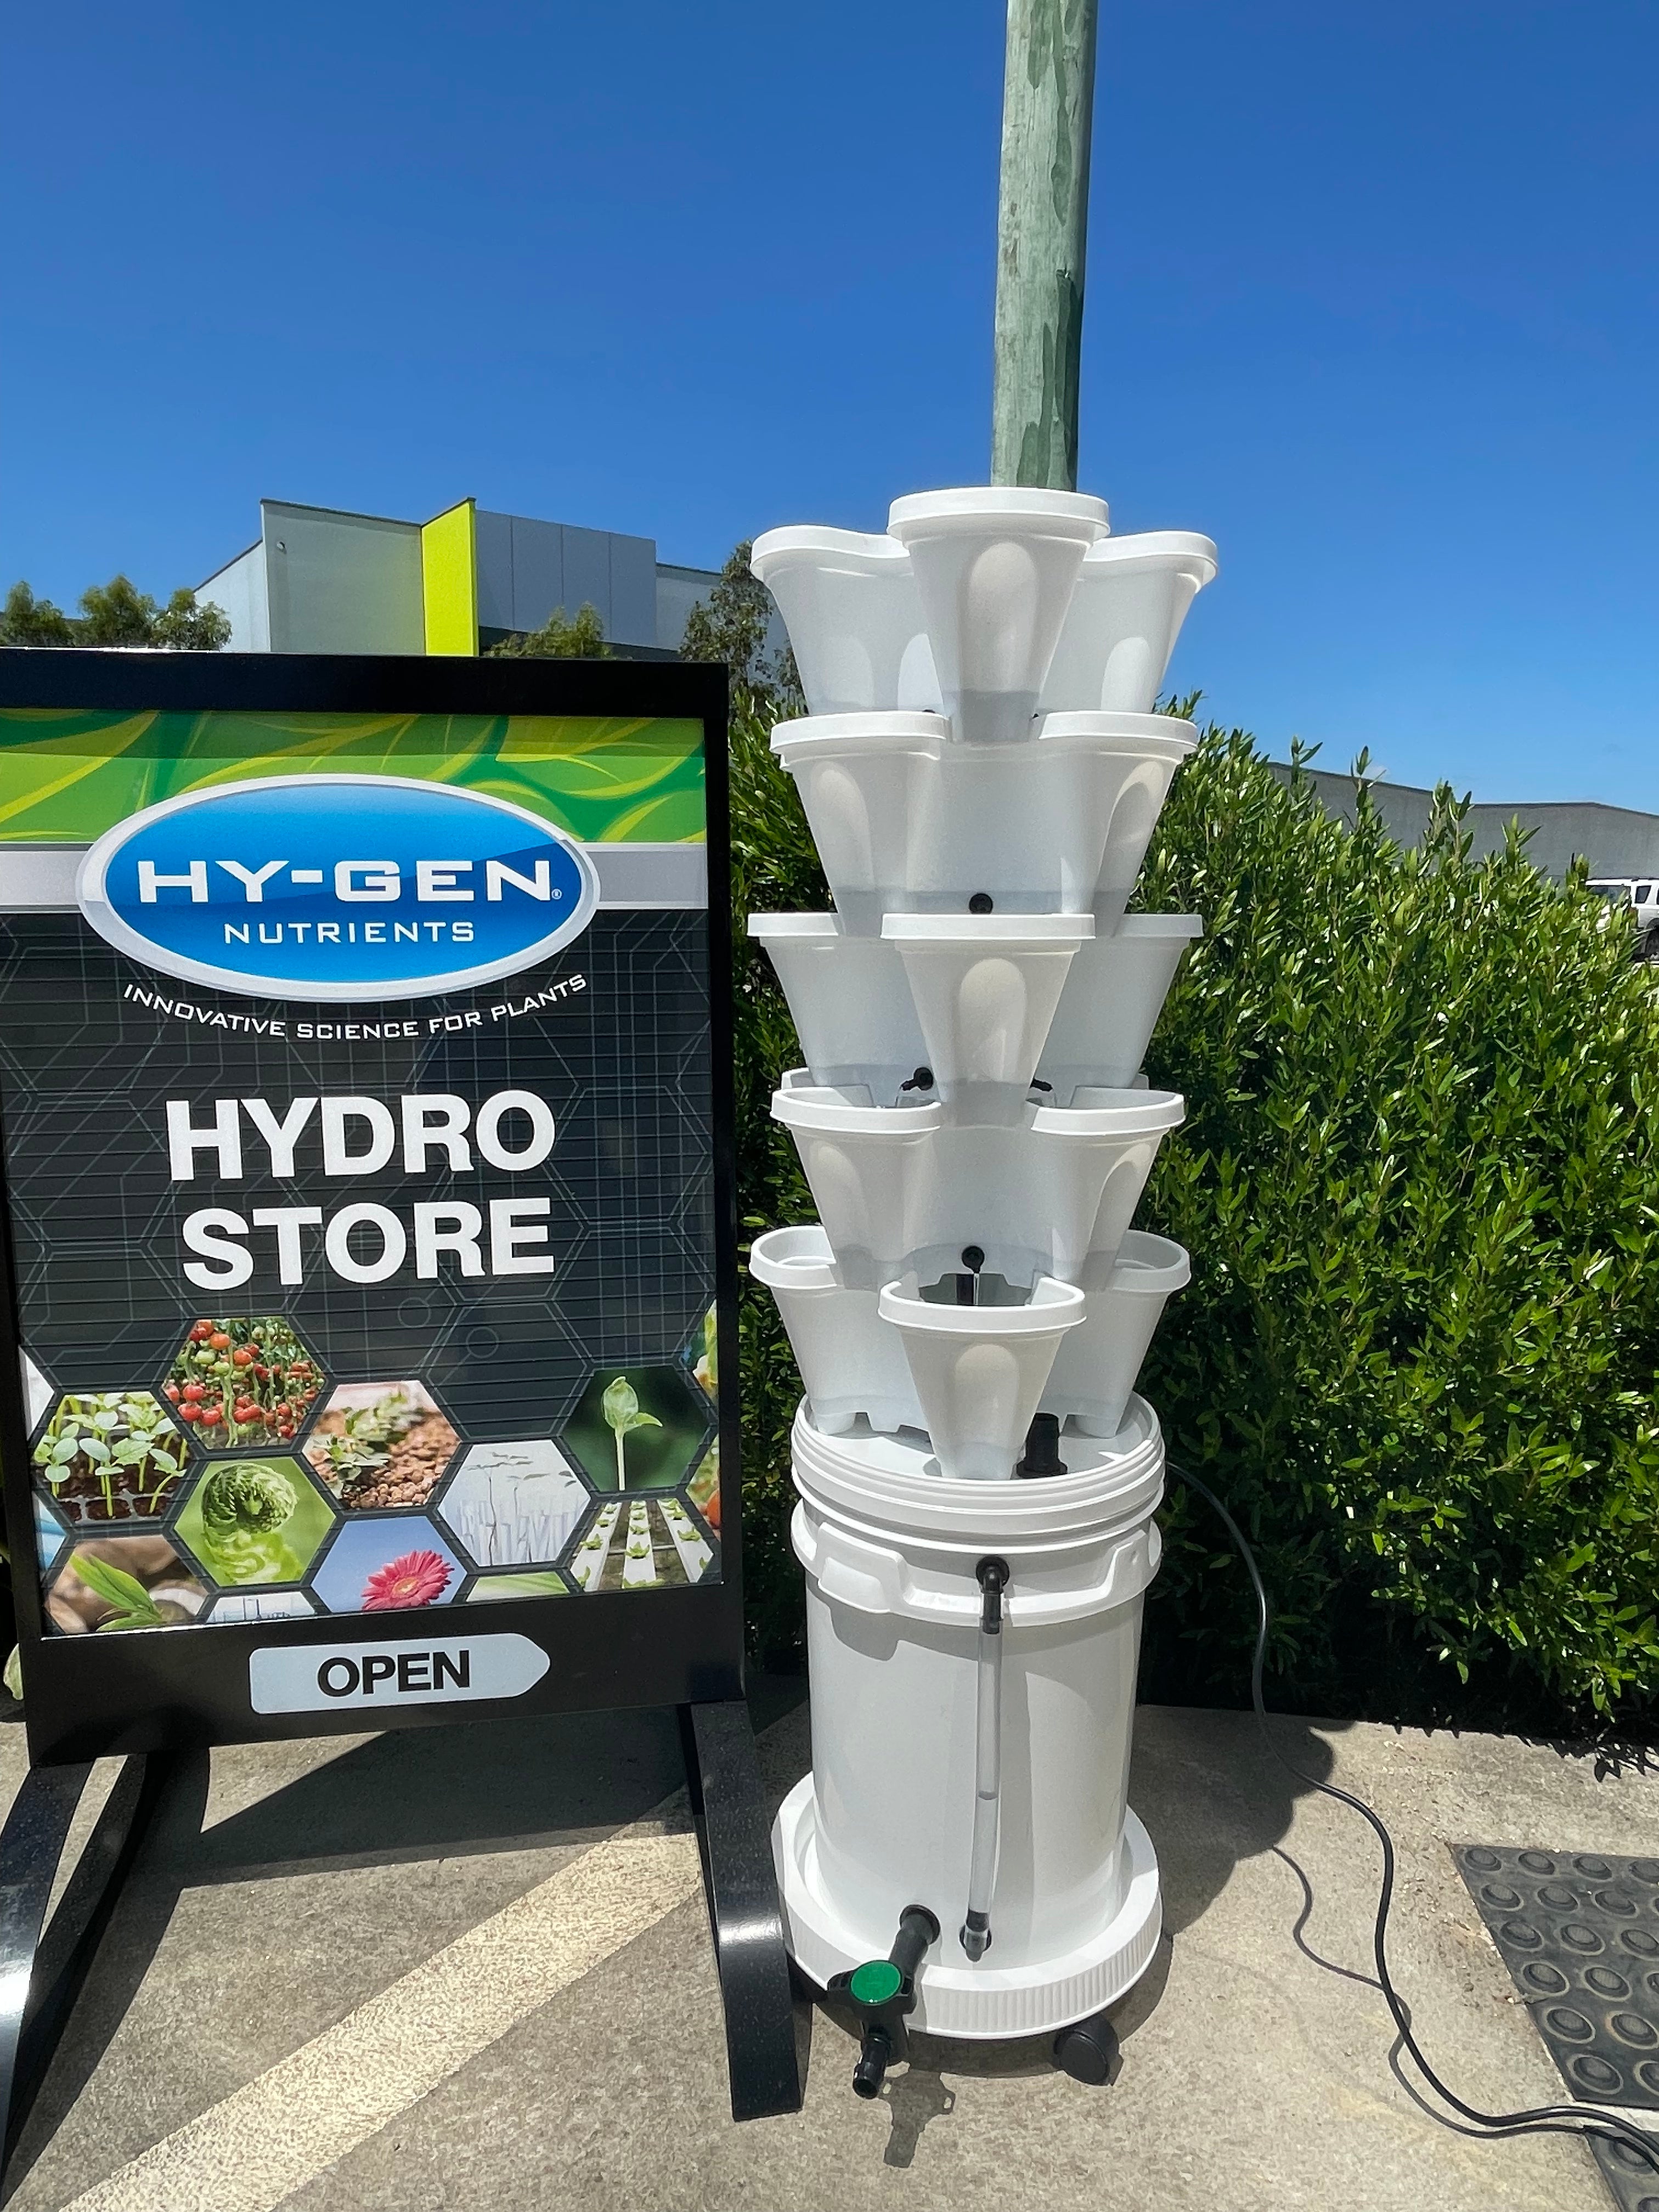 35cm Stackable Hydroponic 5 Tier Tower Garden Vertical Recirculating Hydroponic Tower Systems